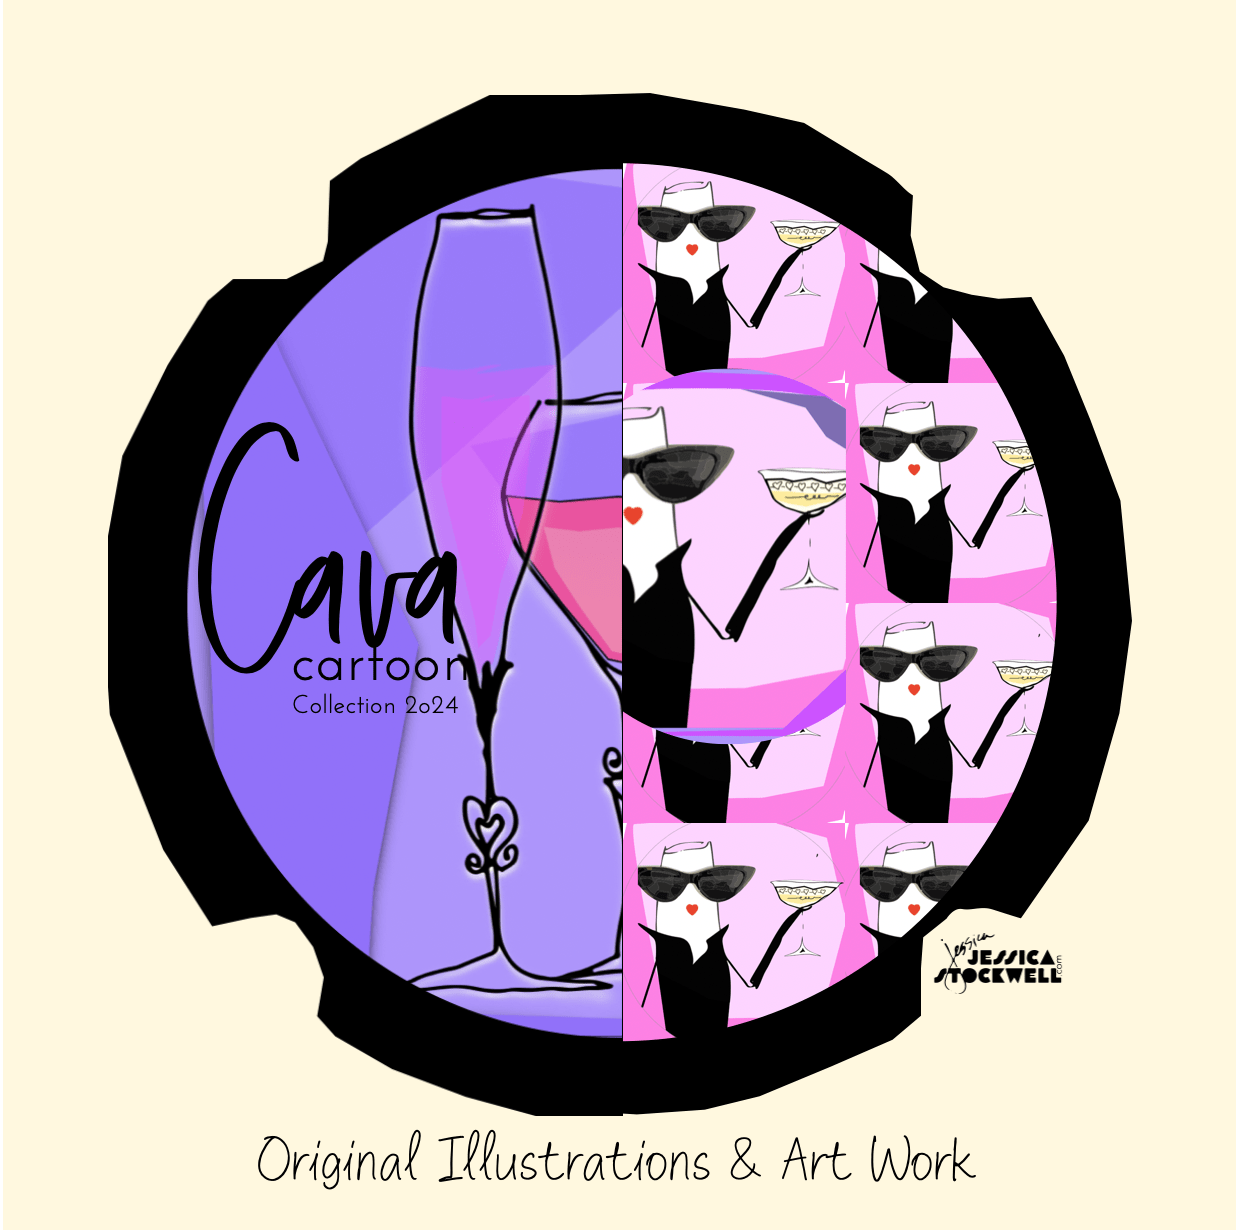 Crown Cap Design #3 2024 by Jessica. Part of the continuing CAVA CARTOON Collection.